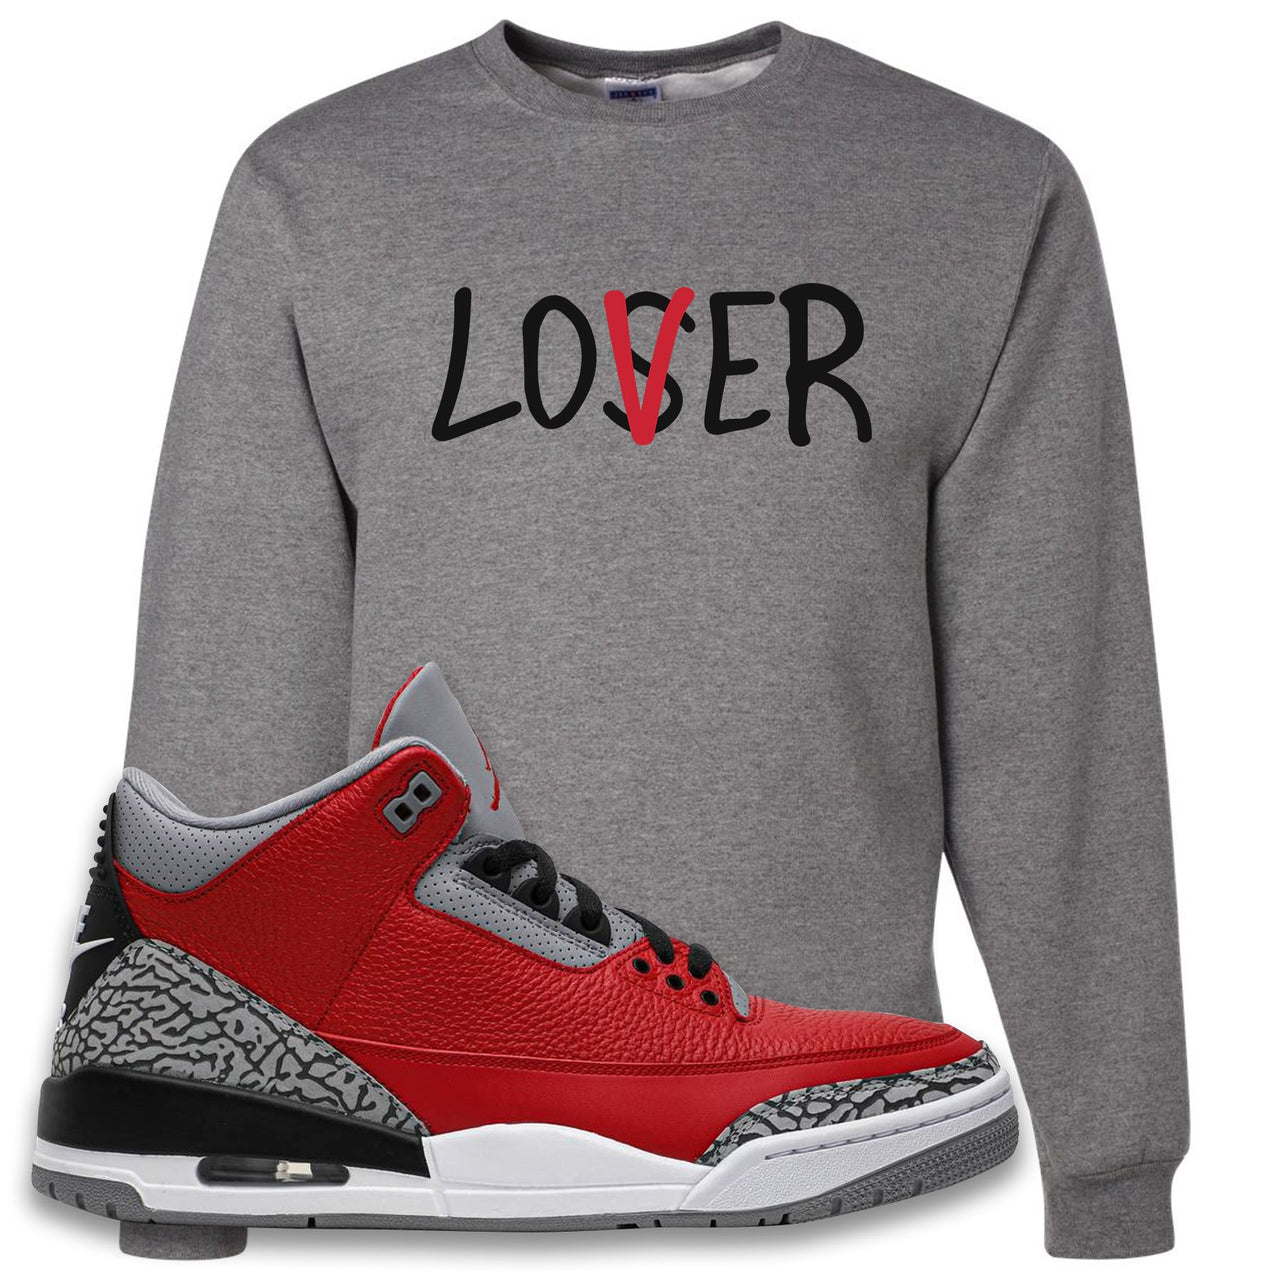 Chicago Exclusive Jordan 3 Red Cement Sneaker Oxford Crewneck Sweatshirt | Crewneck to match Jordan 3 All Star Red Cement Shoes | Lover